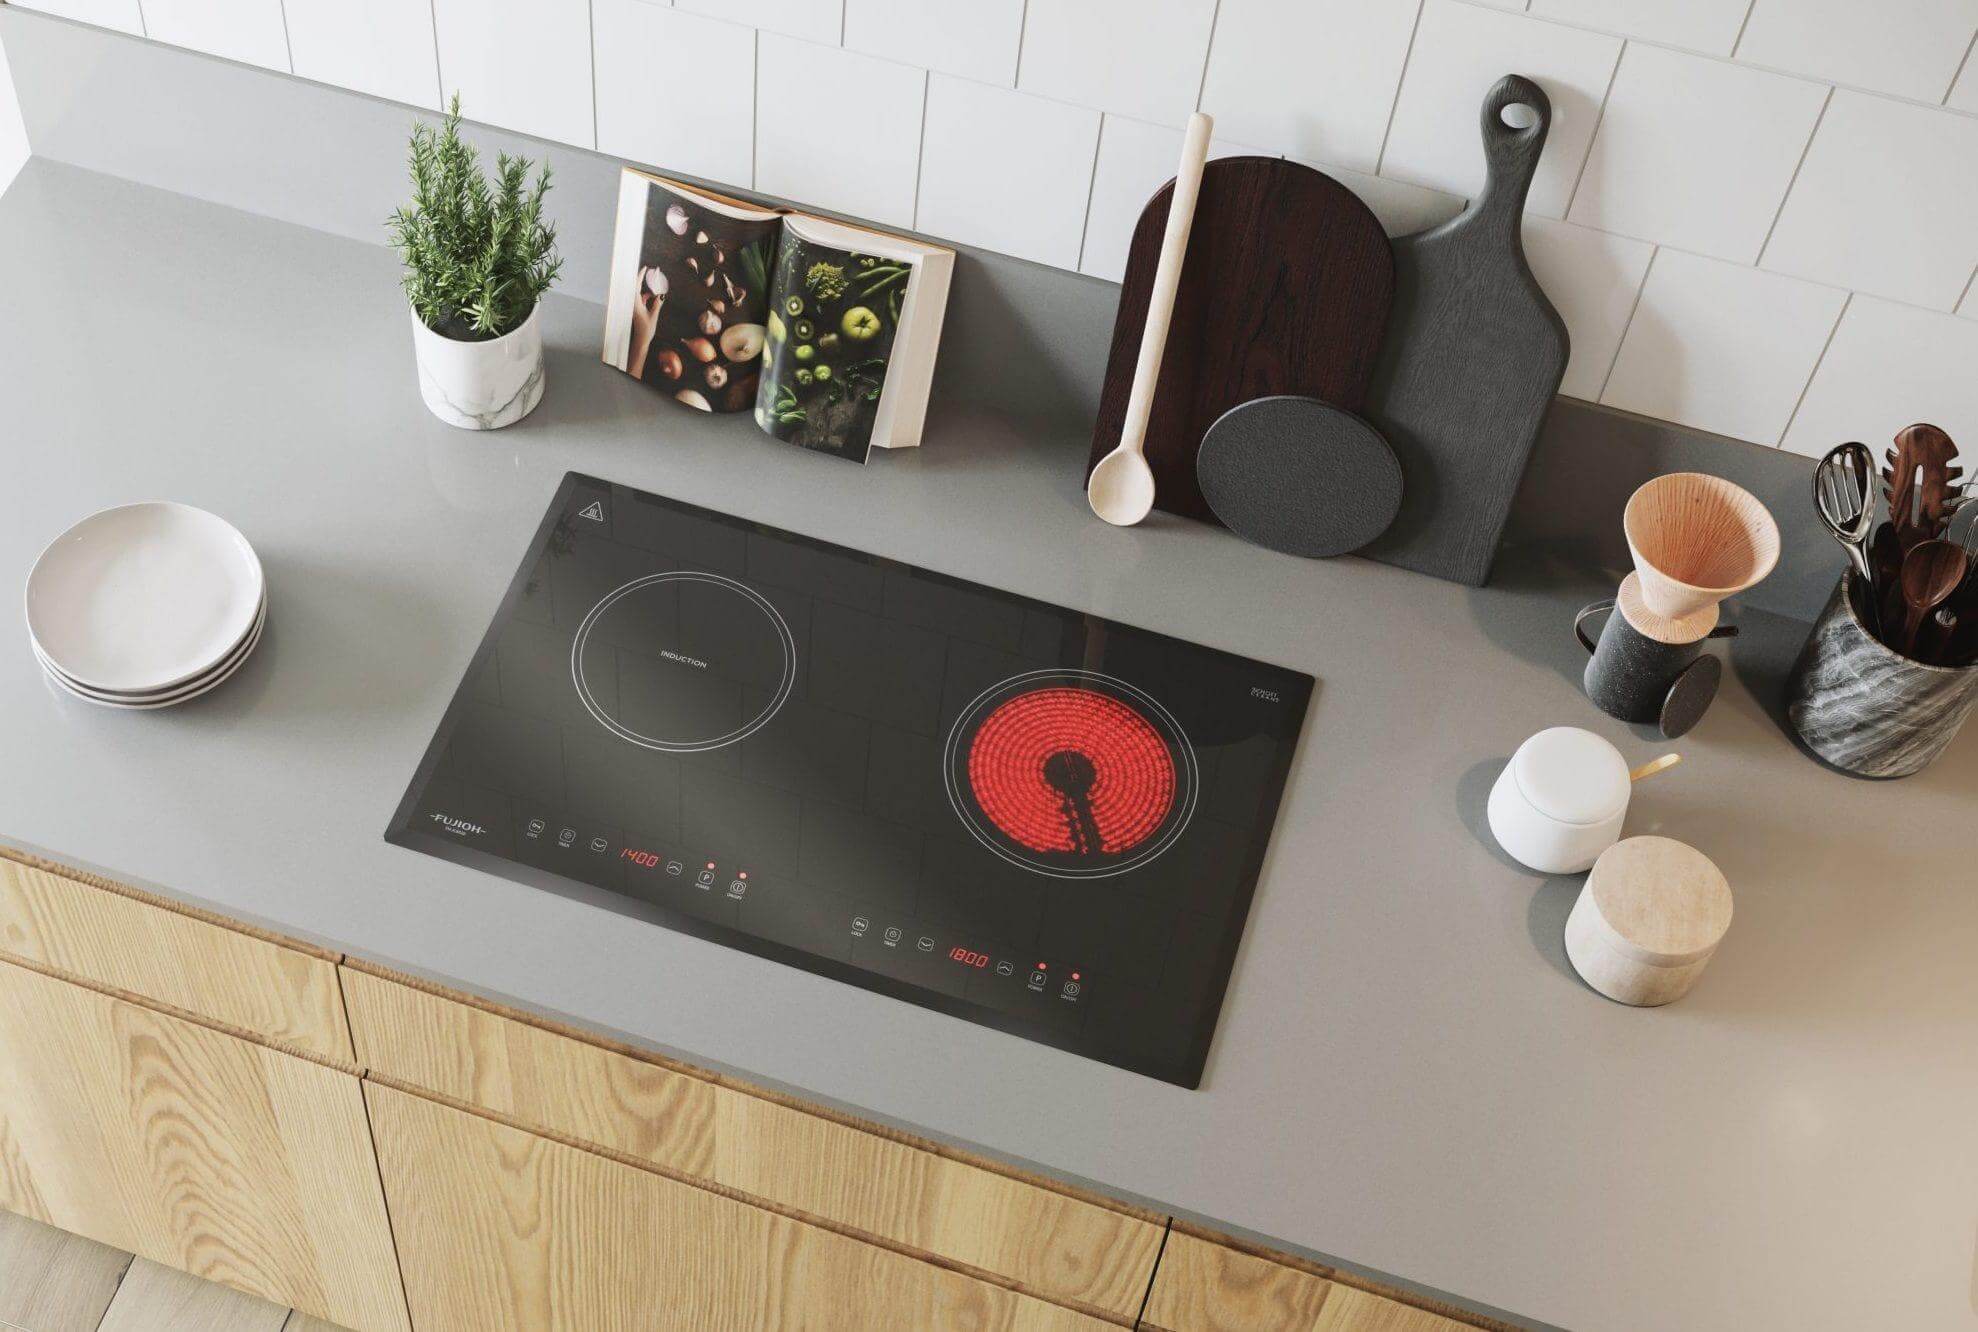 Sleek Fujioh Hybrid Hob with Induction & Ceramic Zones FH-IC6020 in a minimalist kitchen, embodying modern culinary efficiency and design